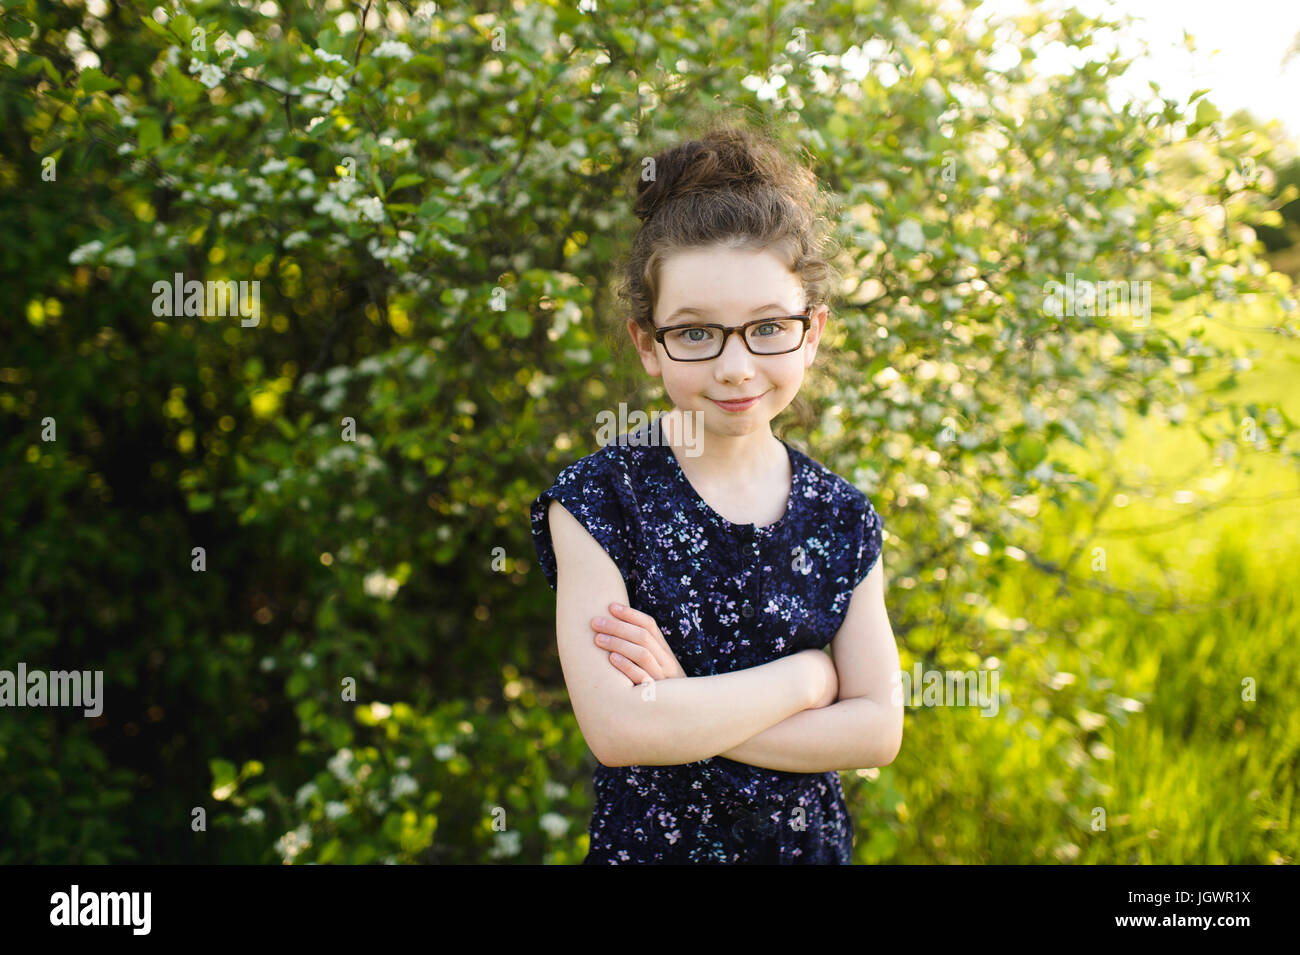 Portrait of girl wearing eye glasses in field with blossoming trees Stock Photo